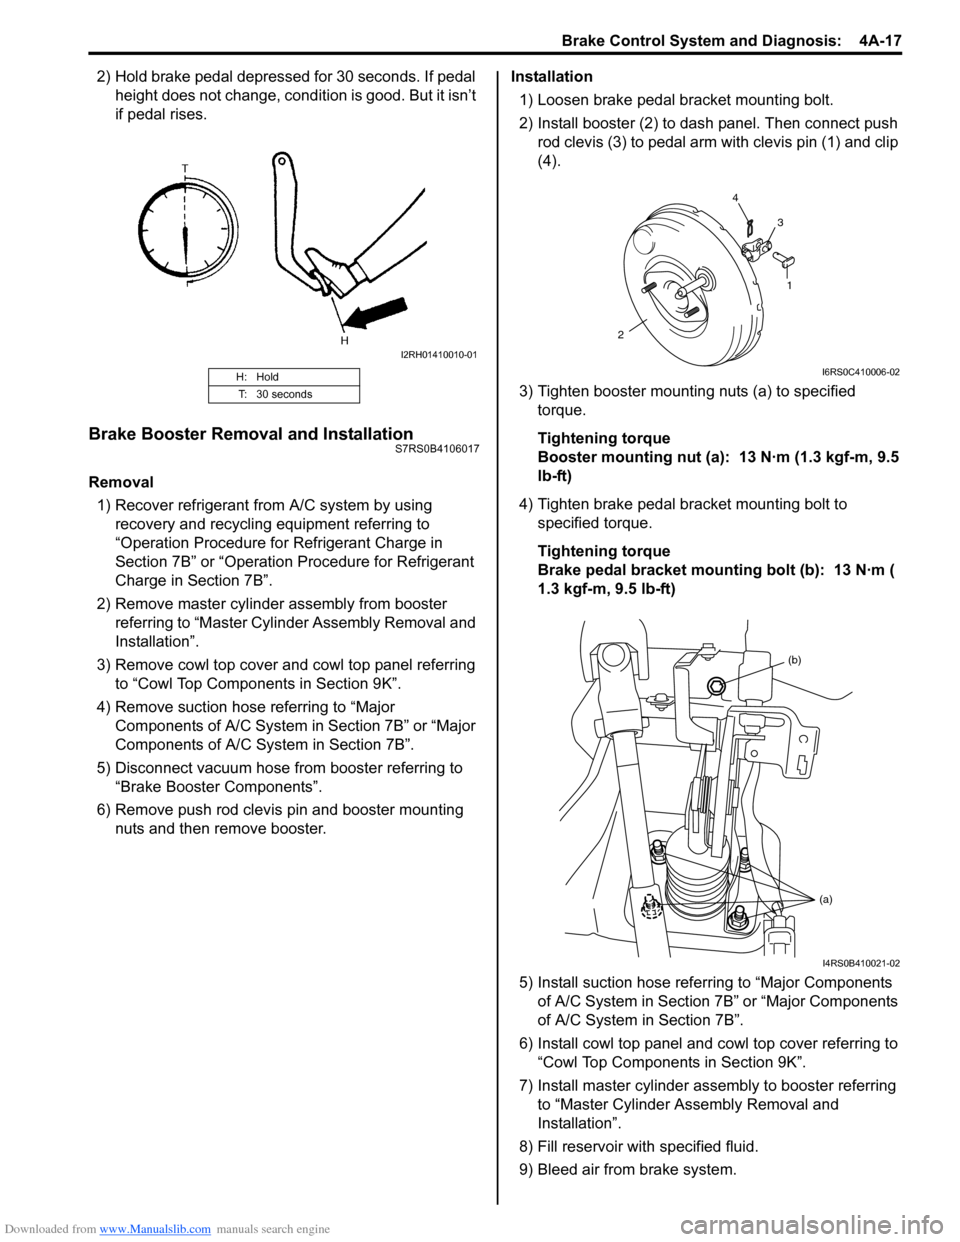 SUZUKI SWIFT 2007 2.G Service Workshop Manual Downloaded from www.Manualslib.com manuals search engine Brake Control System and Diagnosis:  4A-17
2) Hold brake pedal depressed for 30 seconds. If pedal height does not change, condition is good. Bu